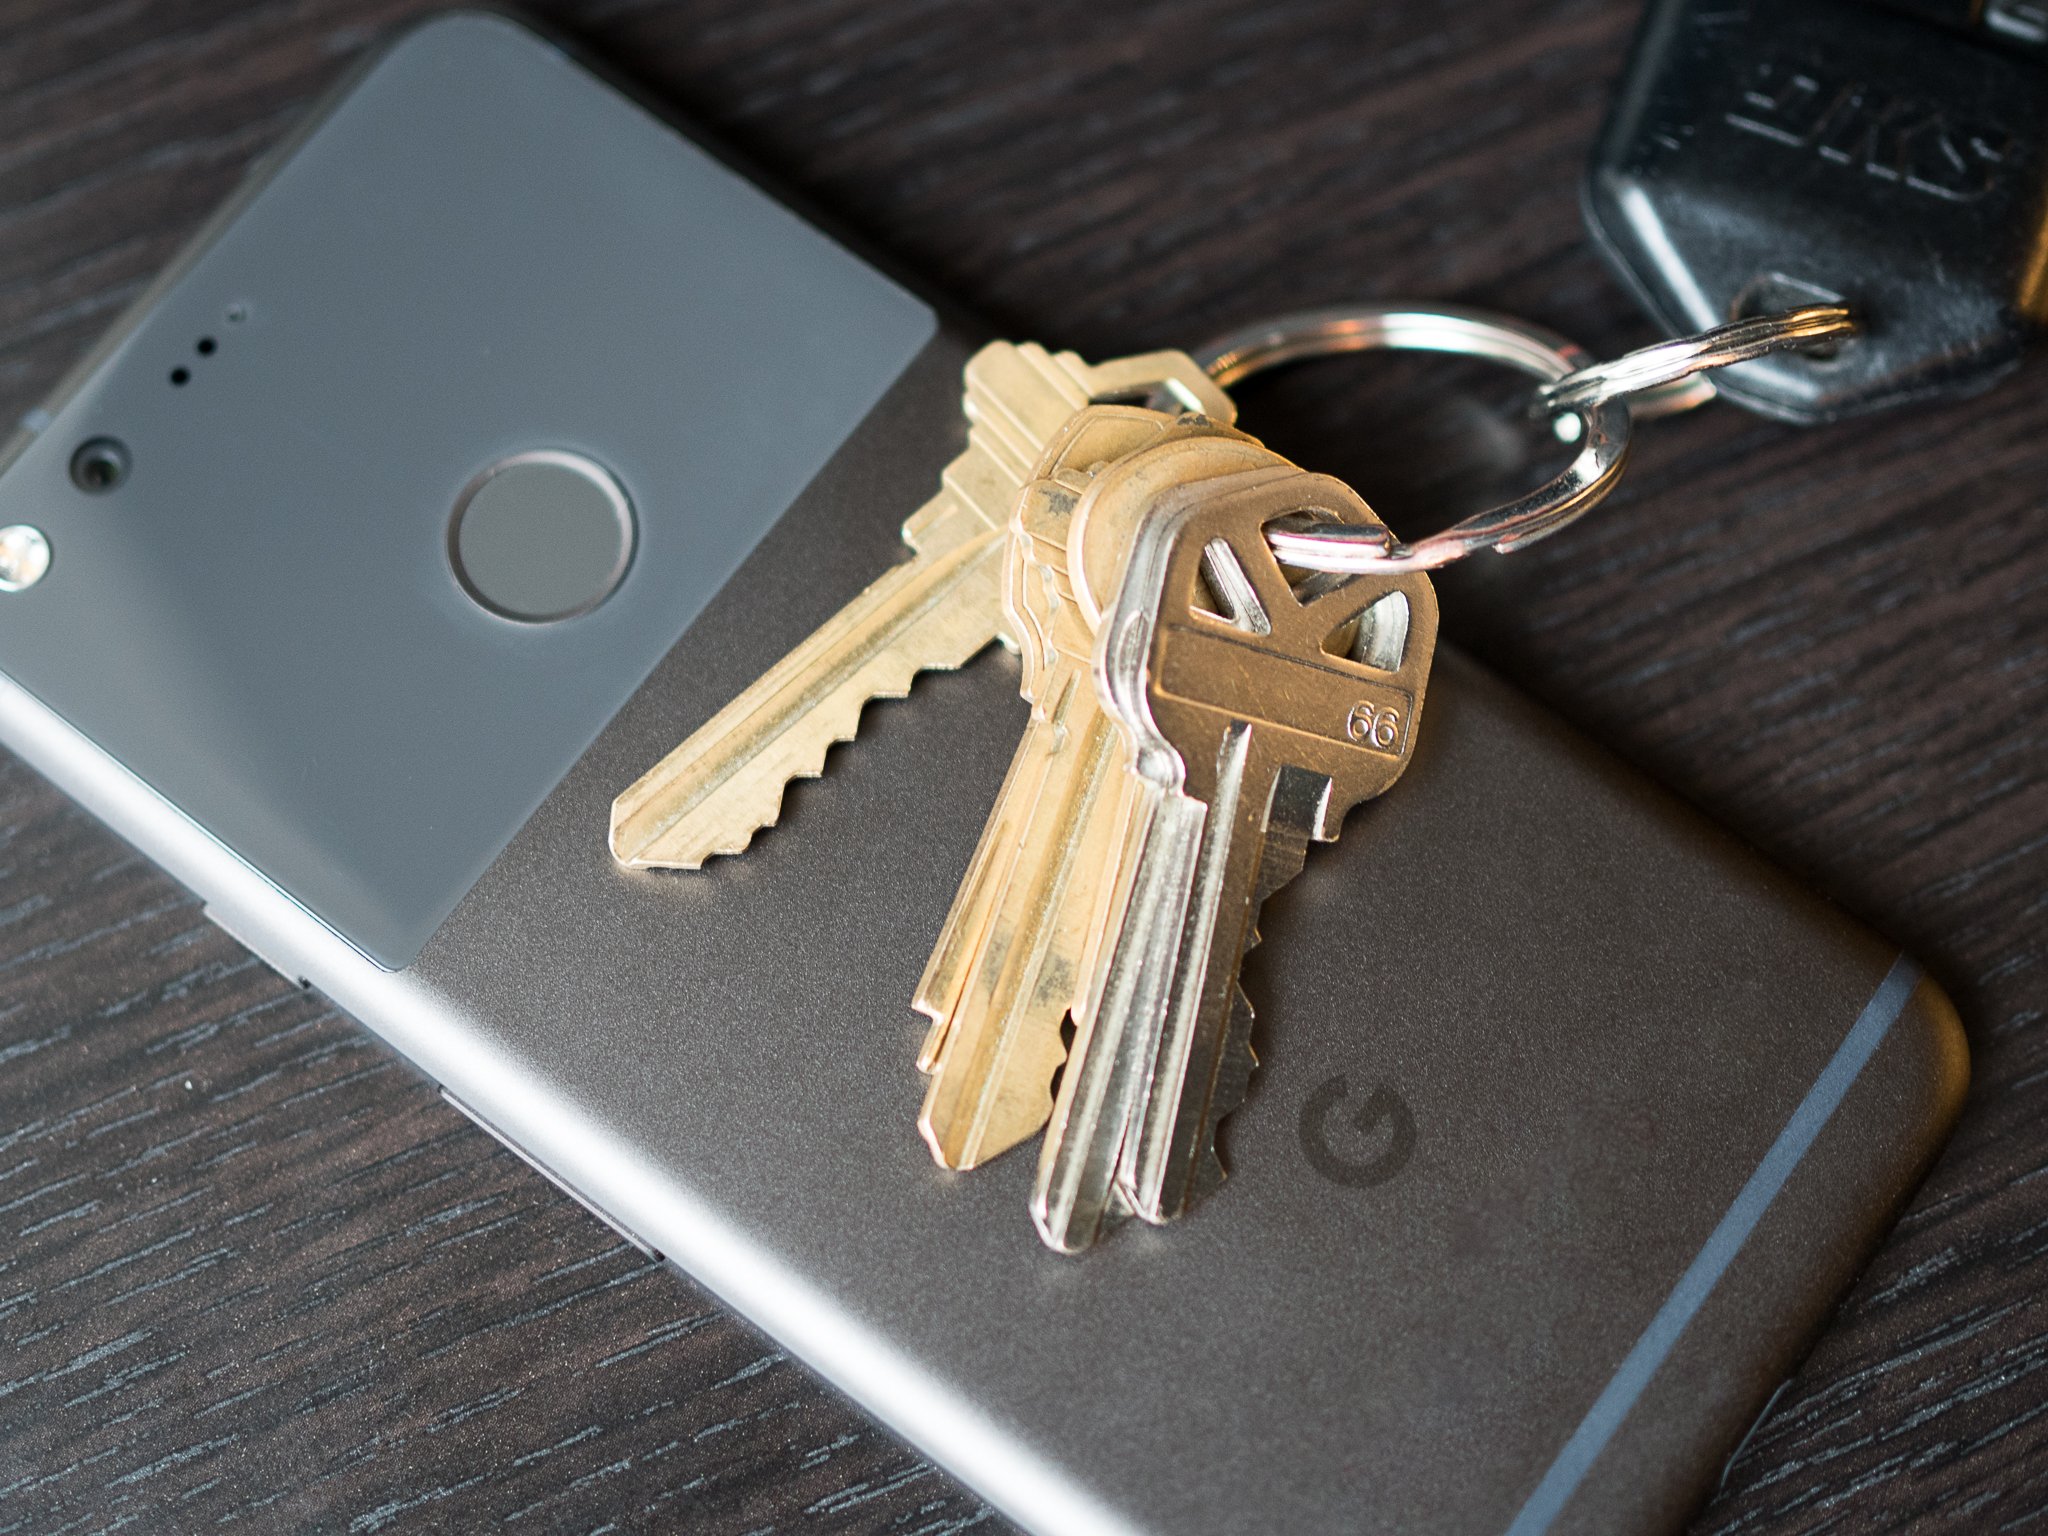 Keys to your phone